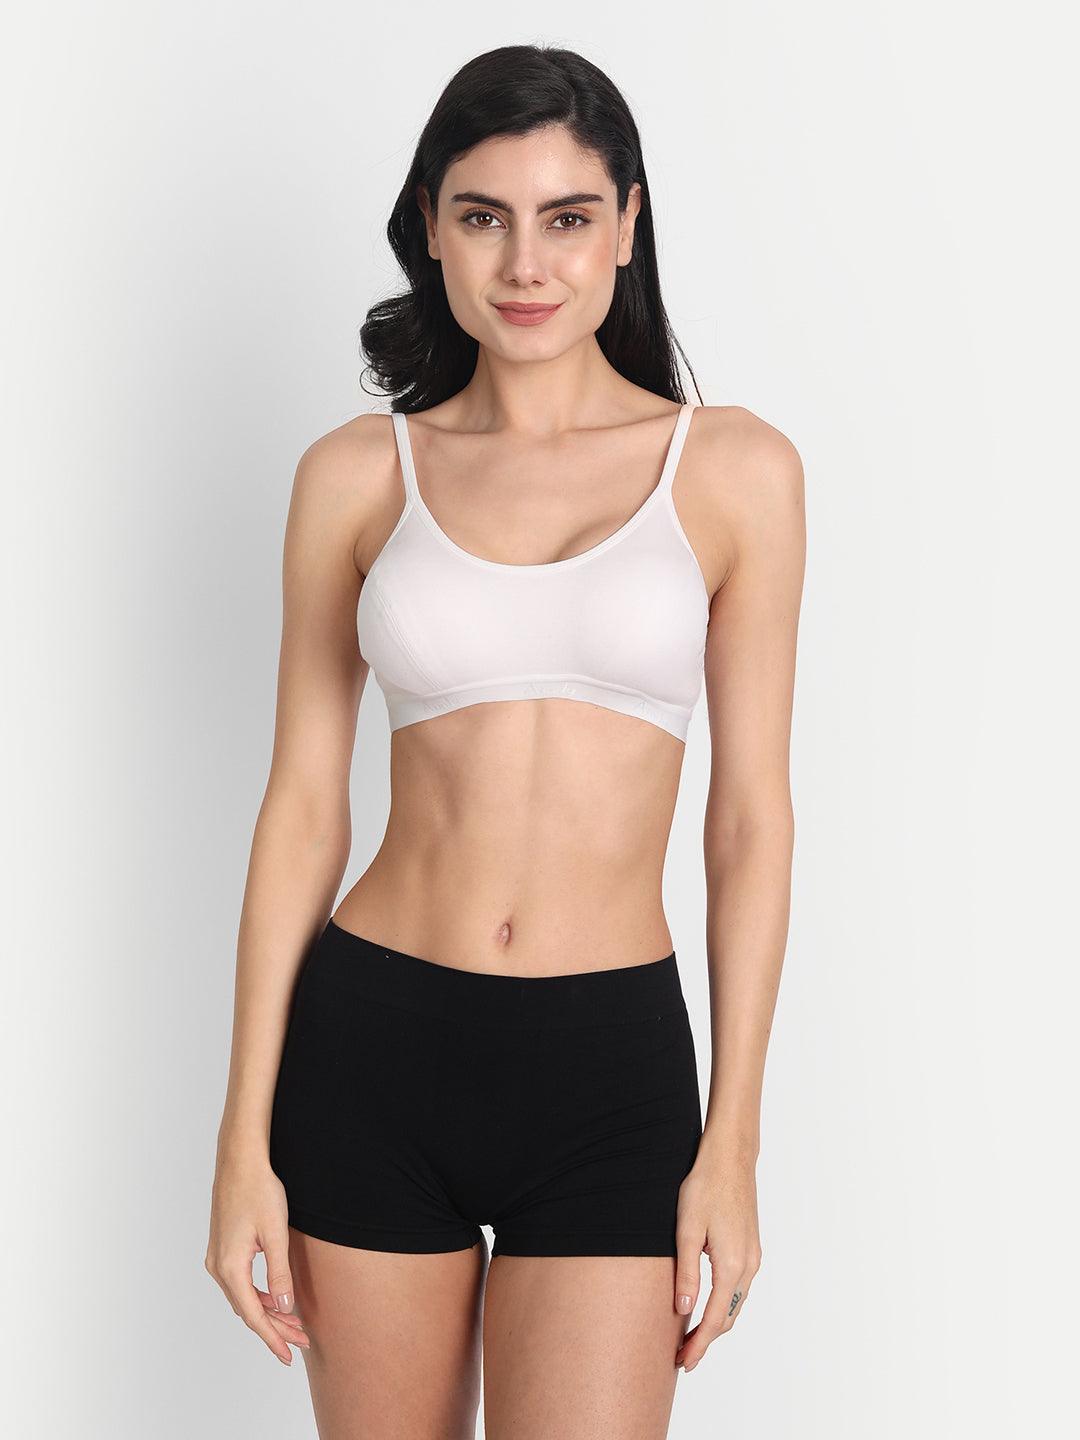 Women's Cotton Non-Padded Non-Wired Seamed Moderate Coverage Sports Bra